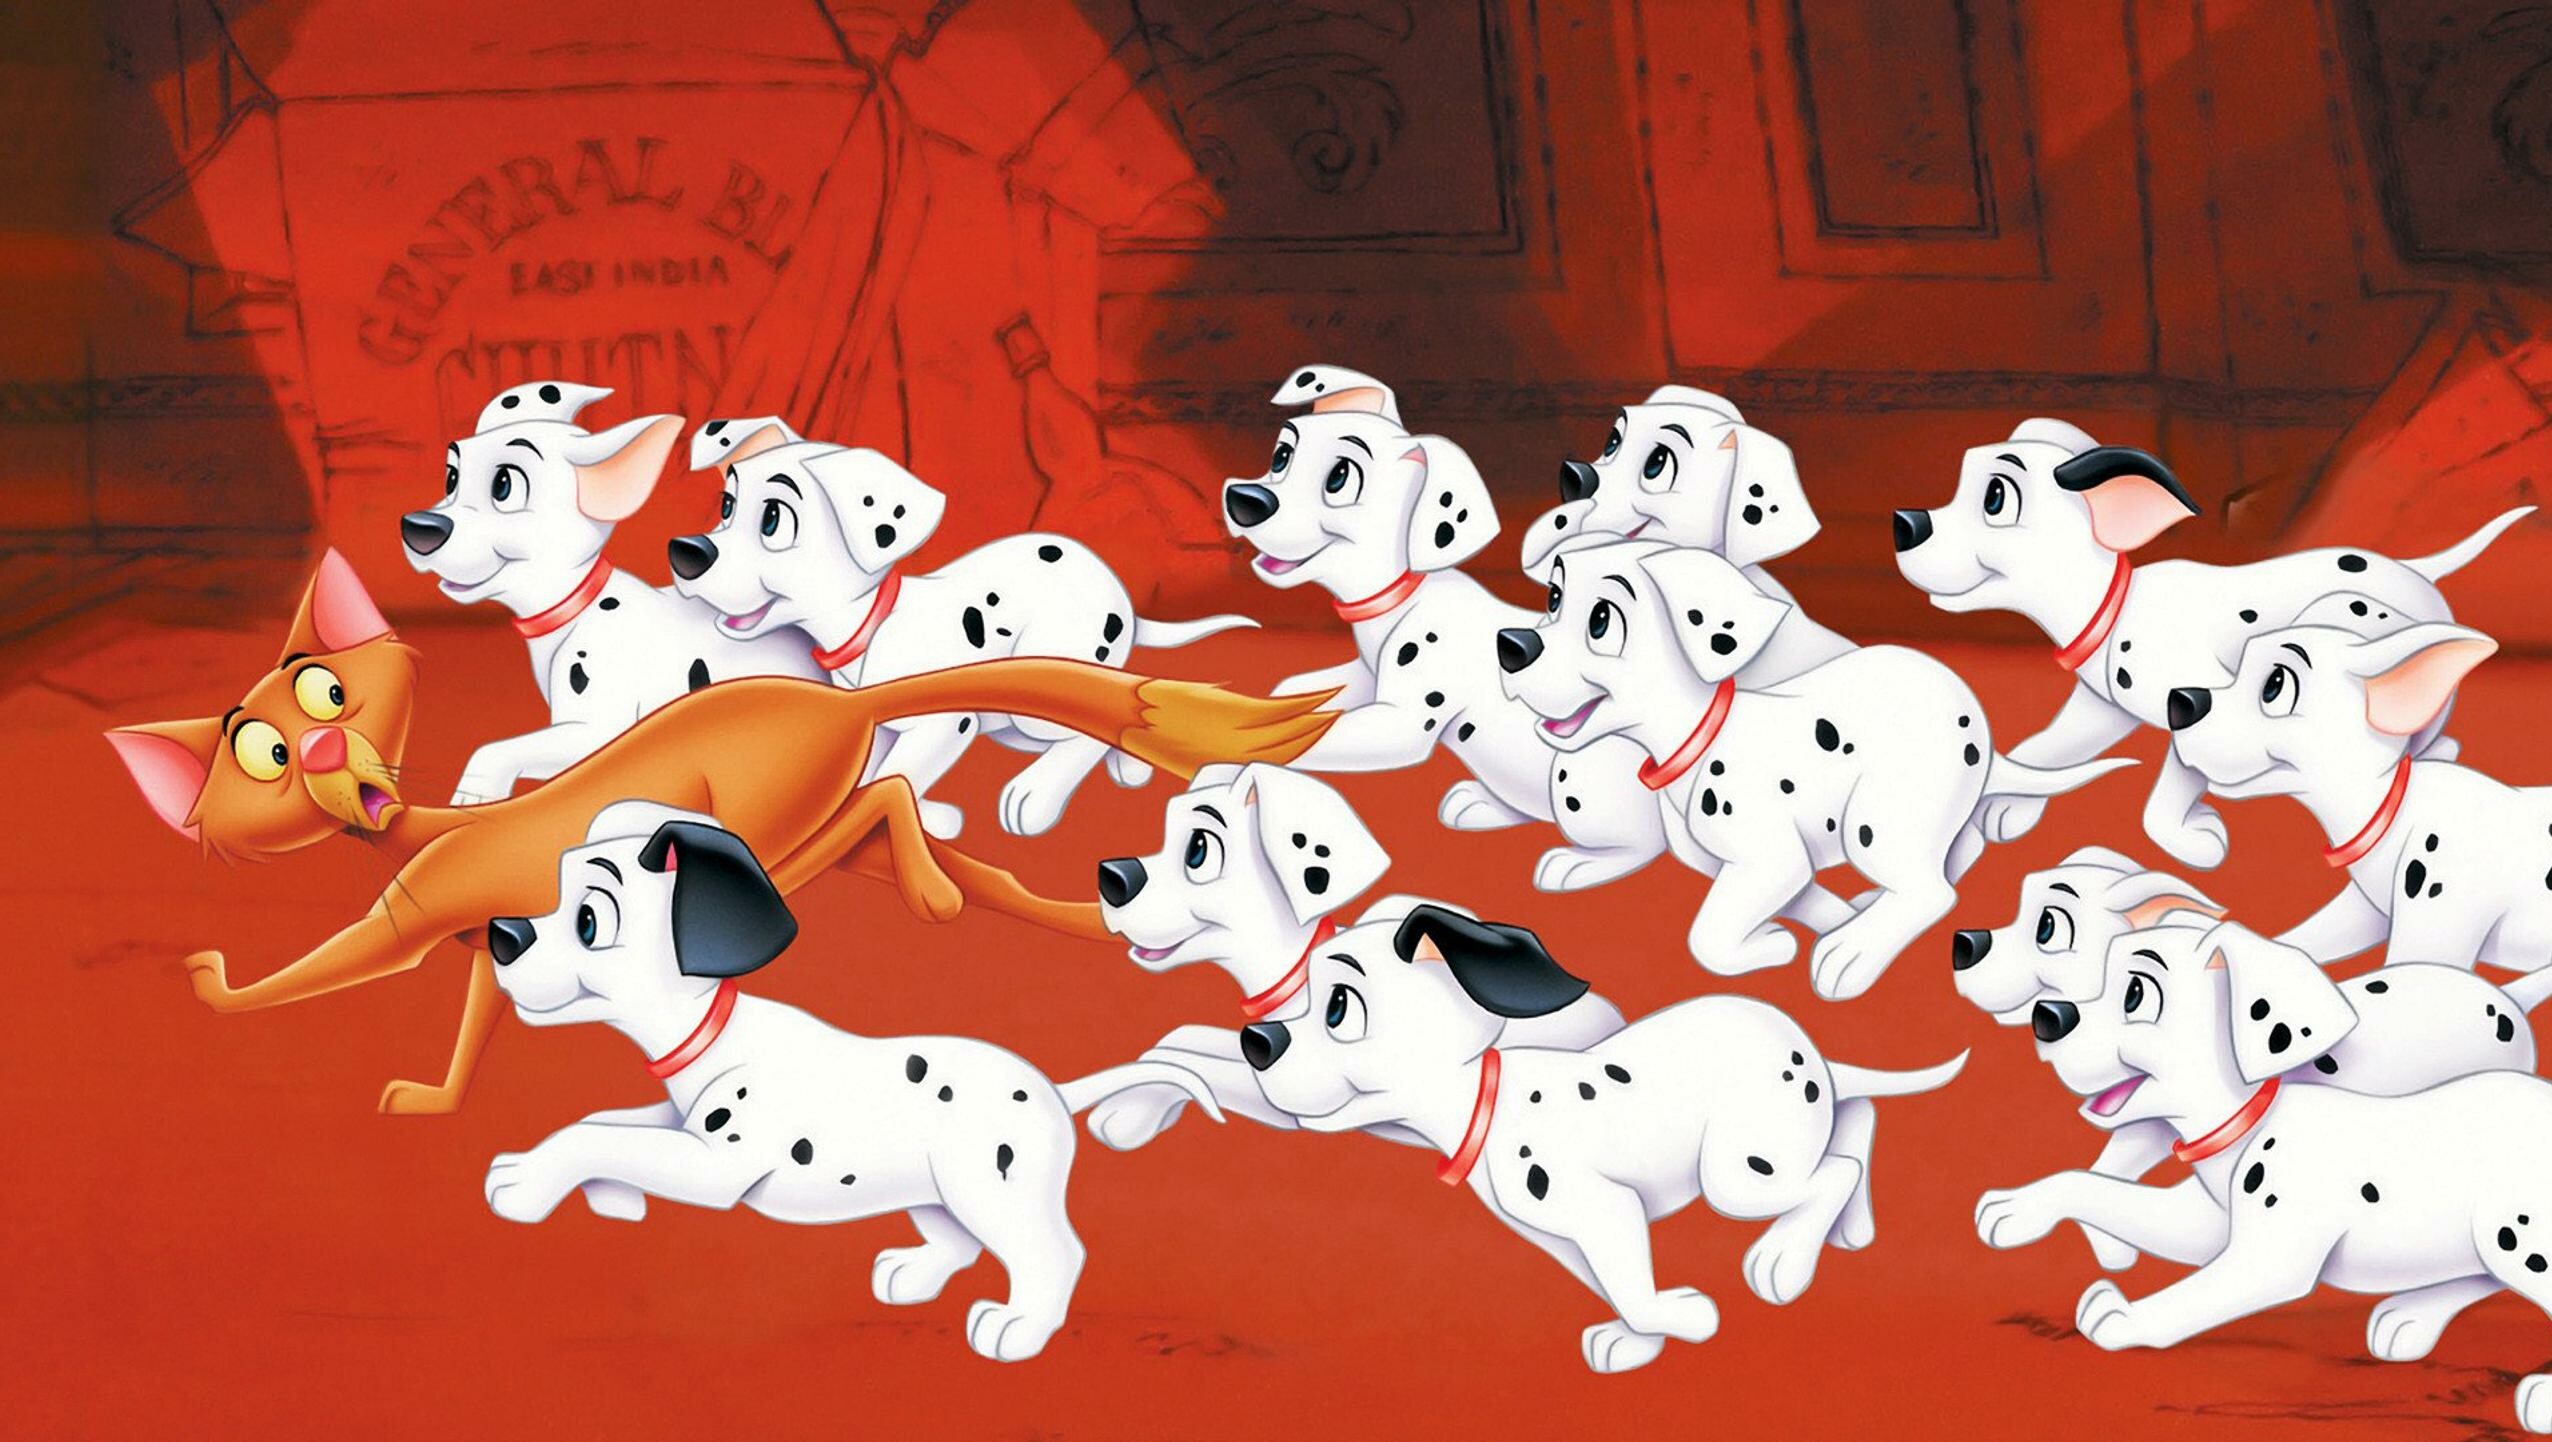 One Hundred and One Dalmatians: The film's plot follows a litter of Dalmatian puppies who are kidnapped by the villainous Cruella de Vil, who wants to make their fur into coats. 2560x1450 HD Background.